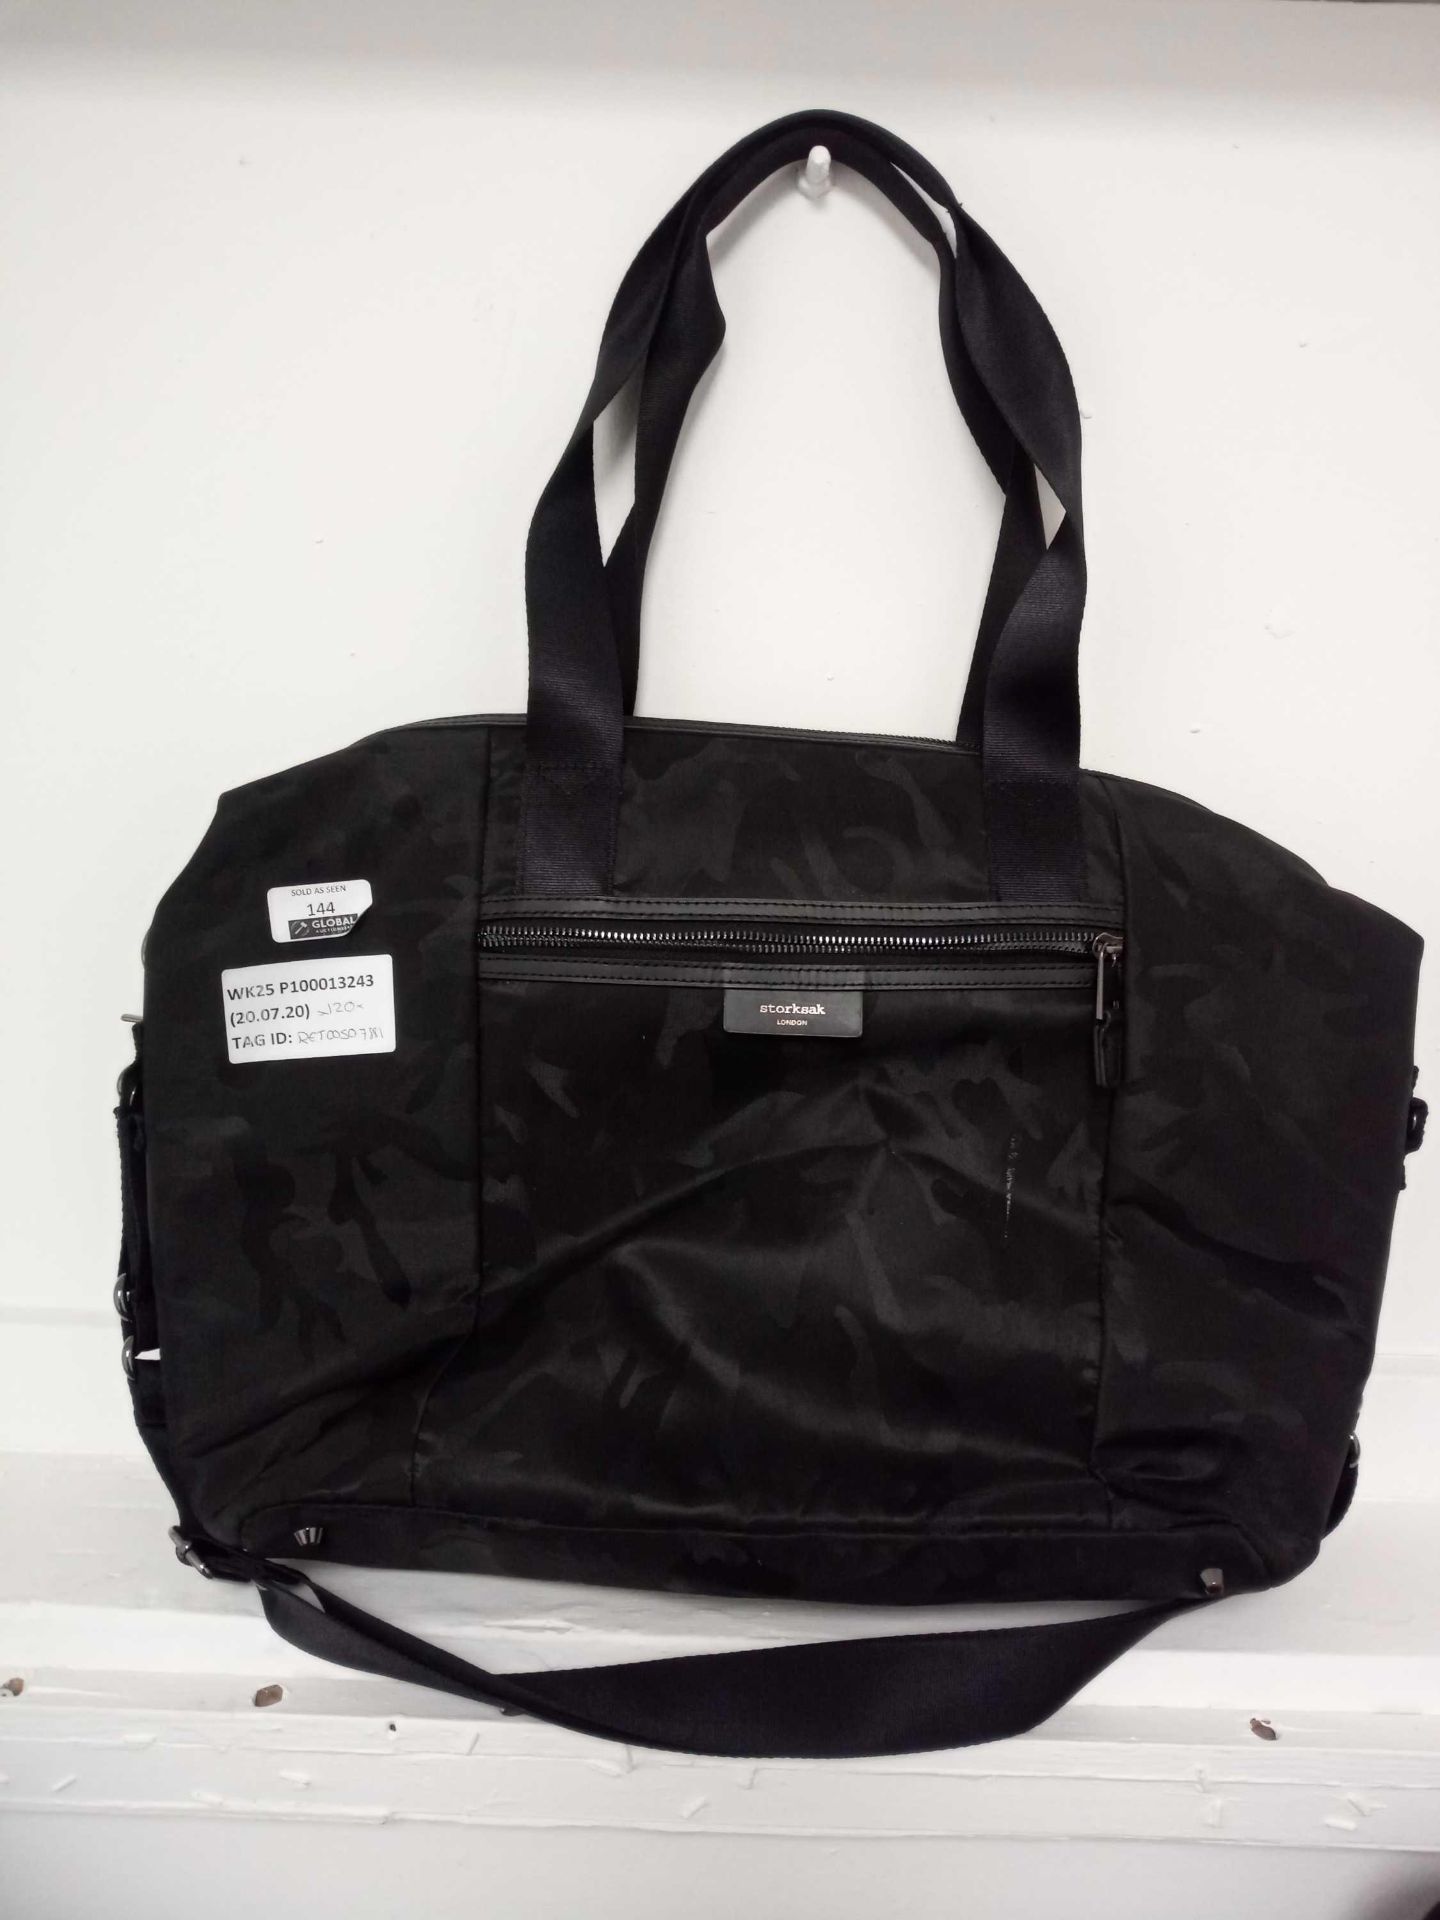 Storksak London Baby Changing Bag In Black (Ret00507881)(Appraisals Available Upon Request) (